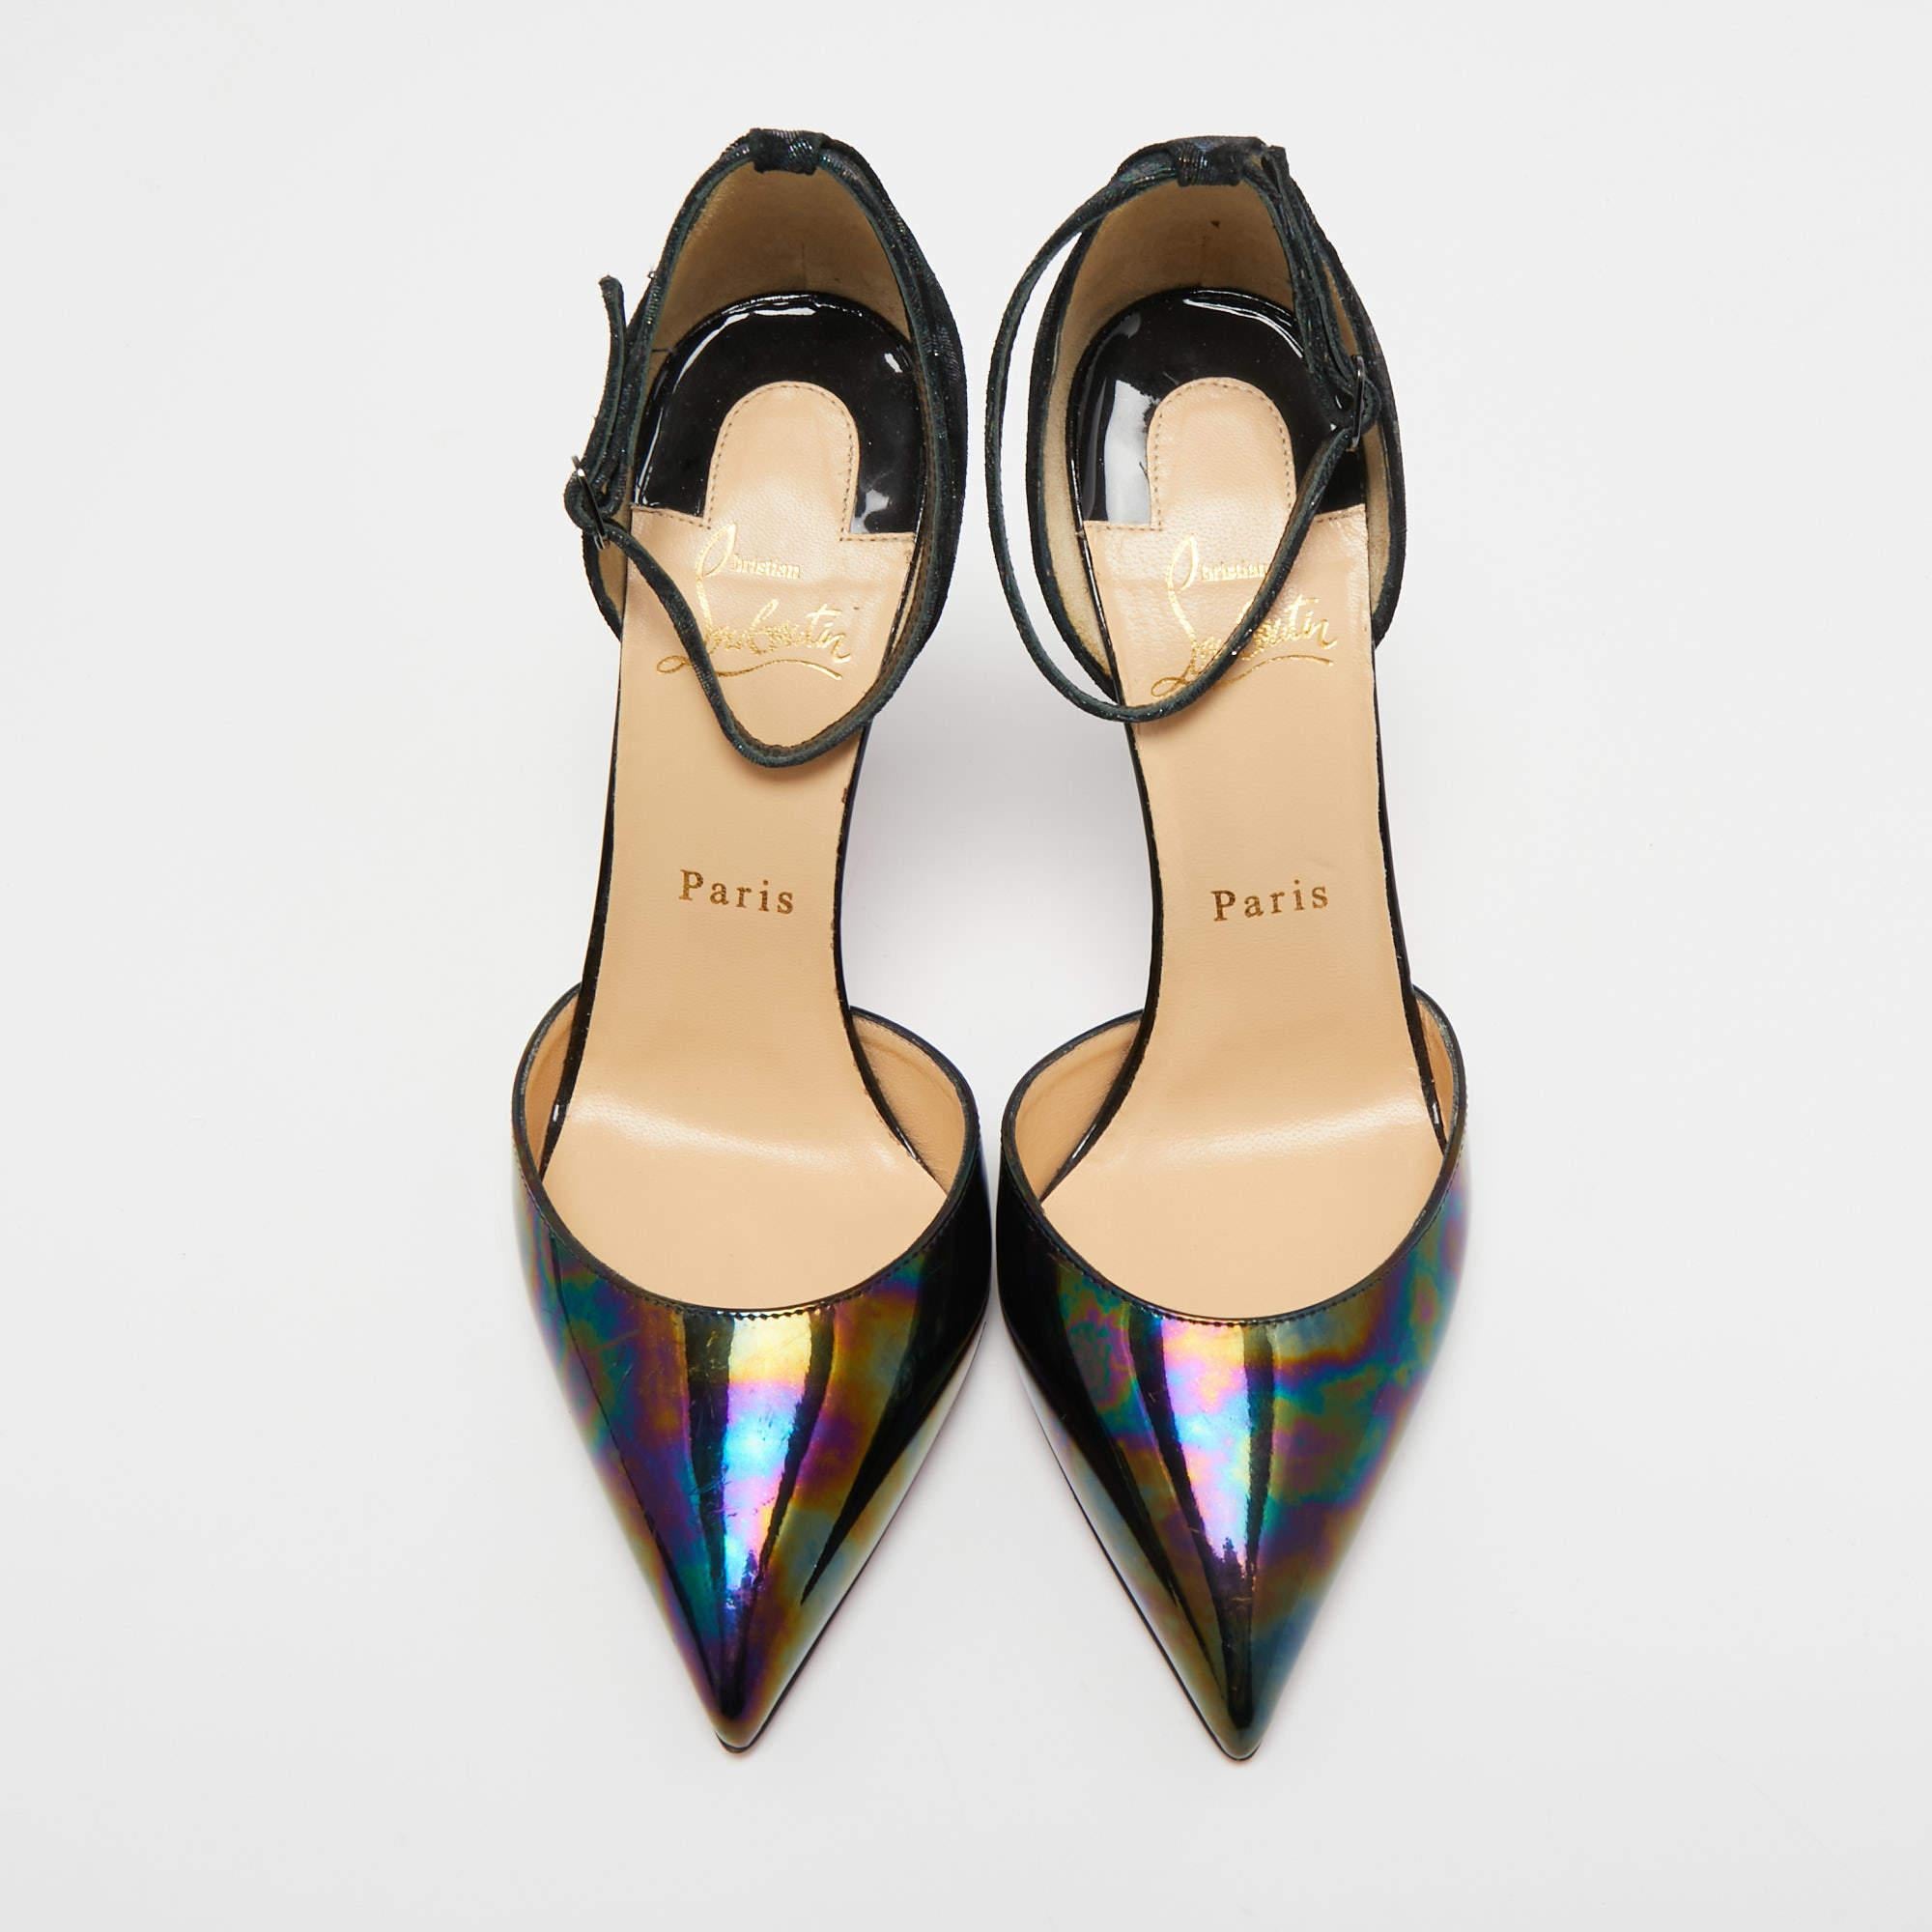 Christian Louboutin Black Iridescent Leather and Pumps Size 38.5 3